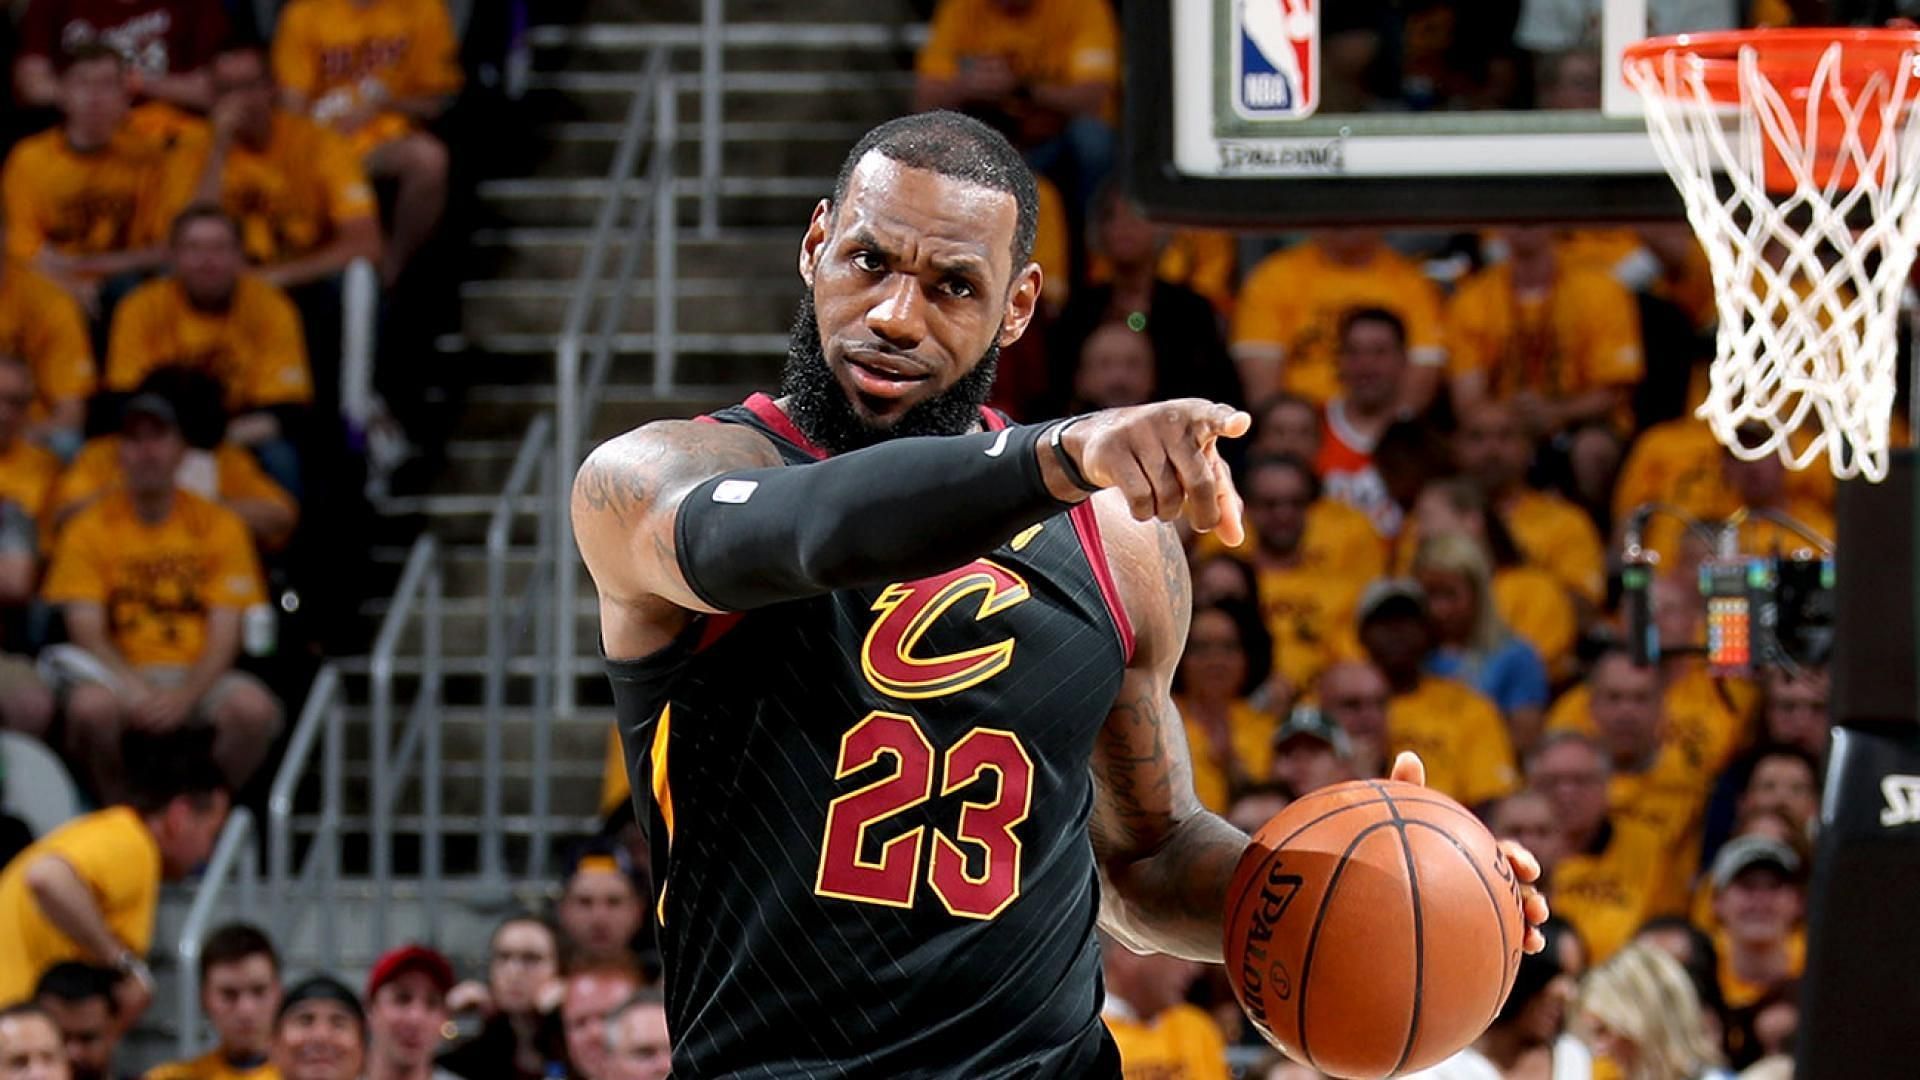 Cavs news: LeBron James reflects on Game 1 loss in 2018 Finals